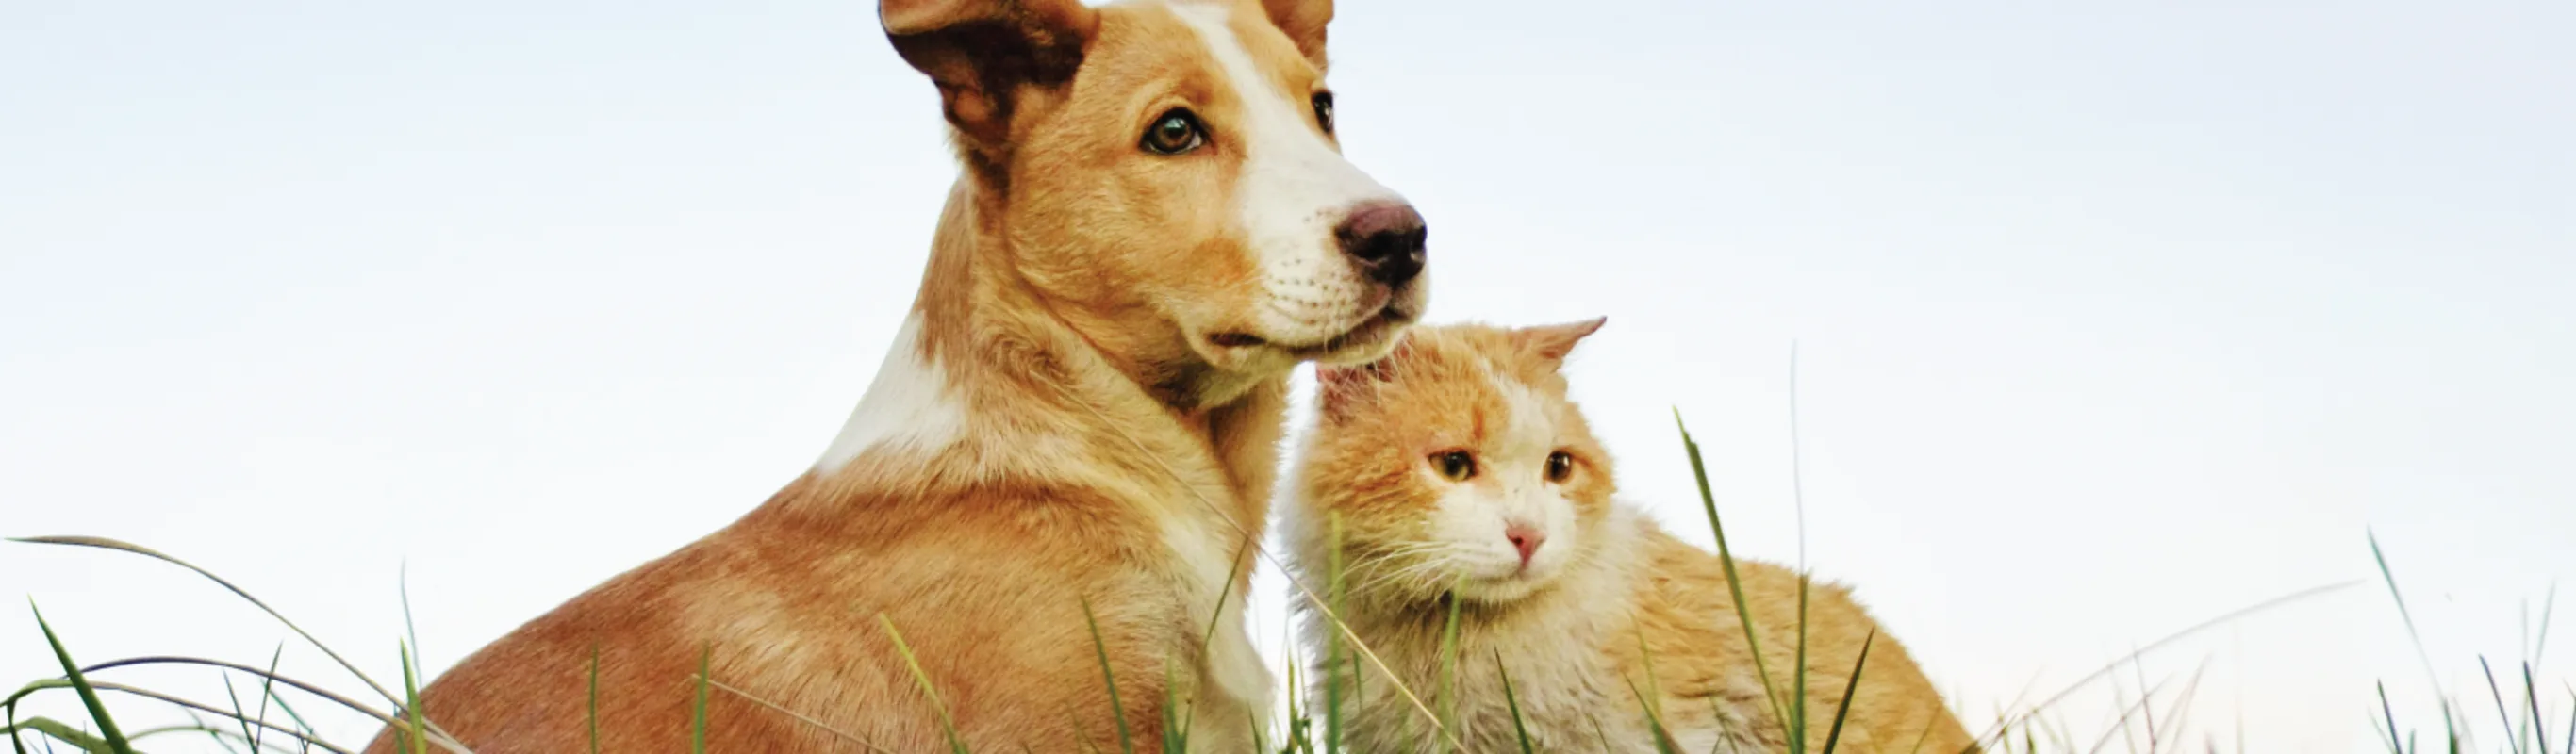 Cat and dog in grass looking away